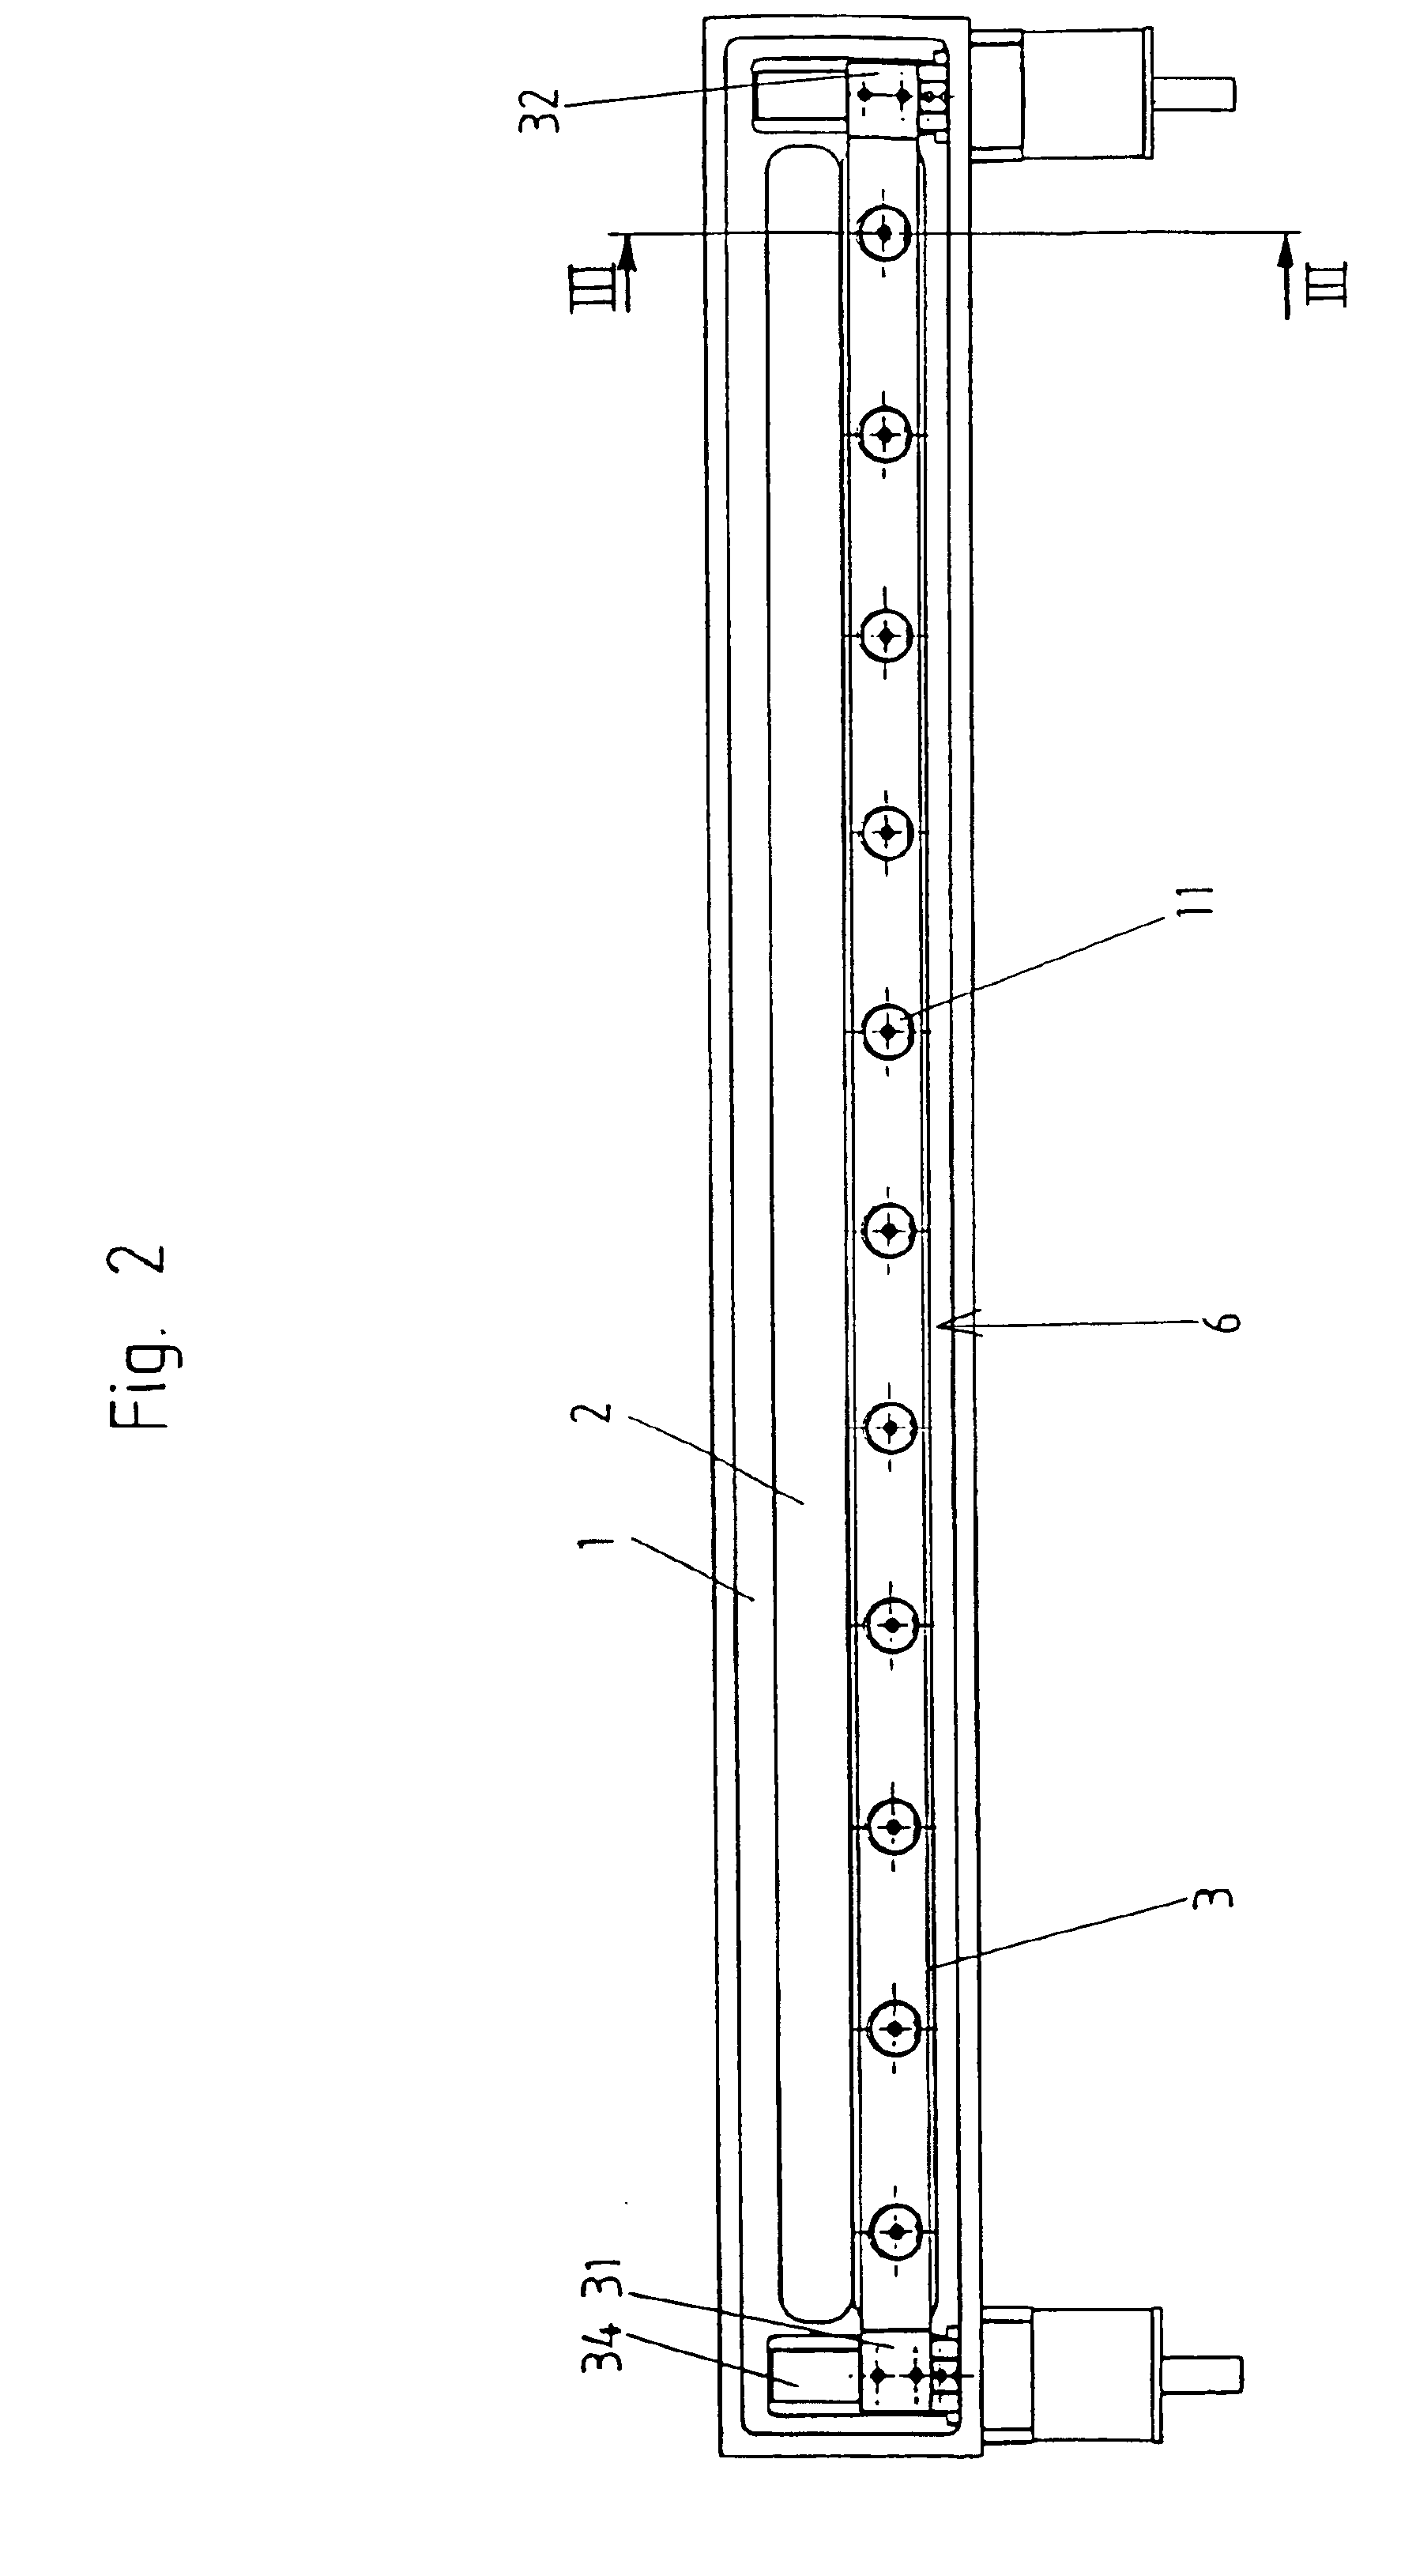 Closure device for vacuum closure of at least one opening in a wall